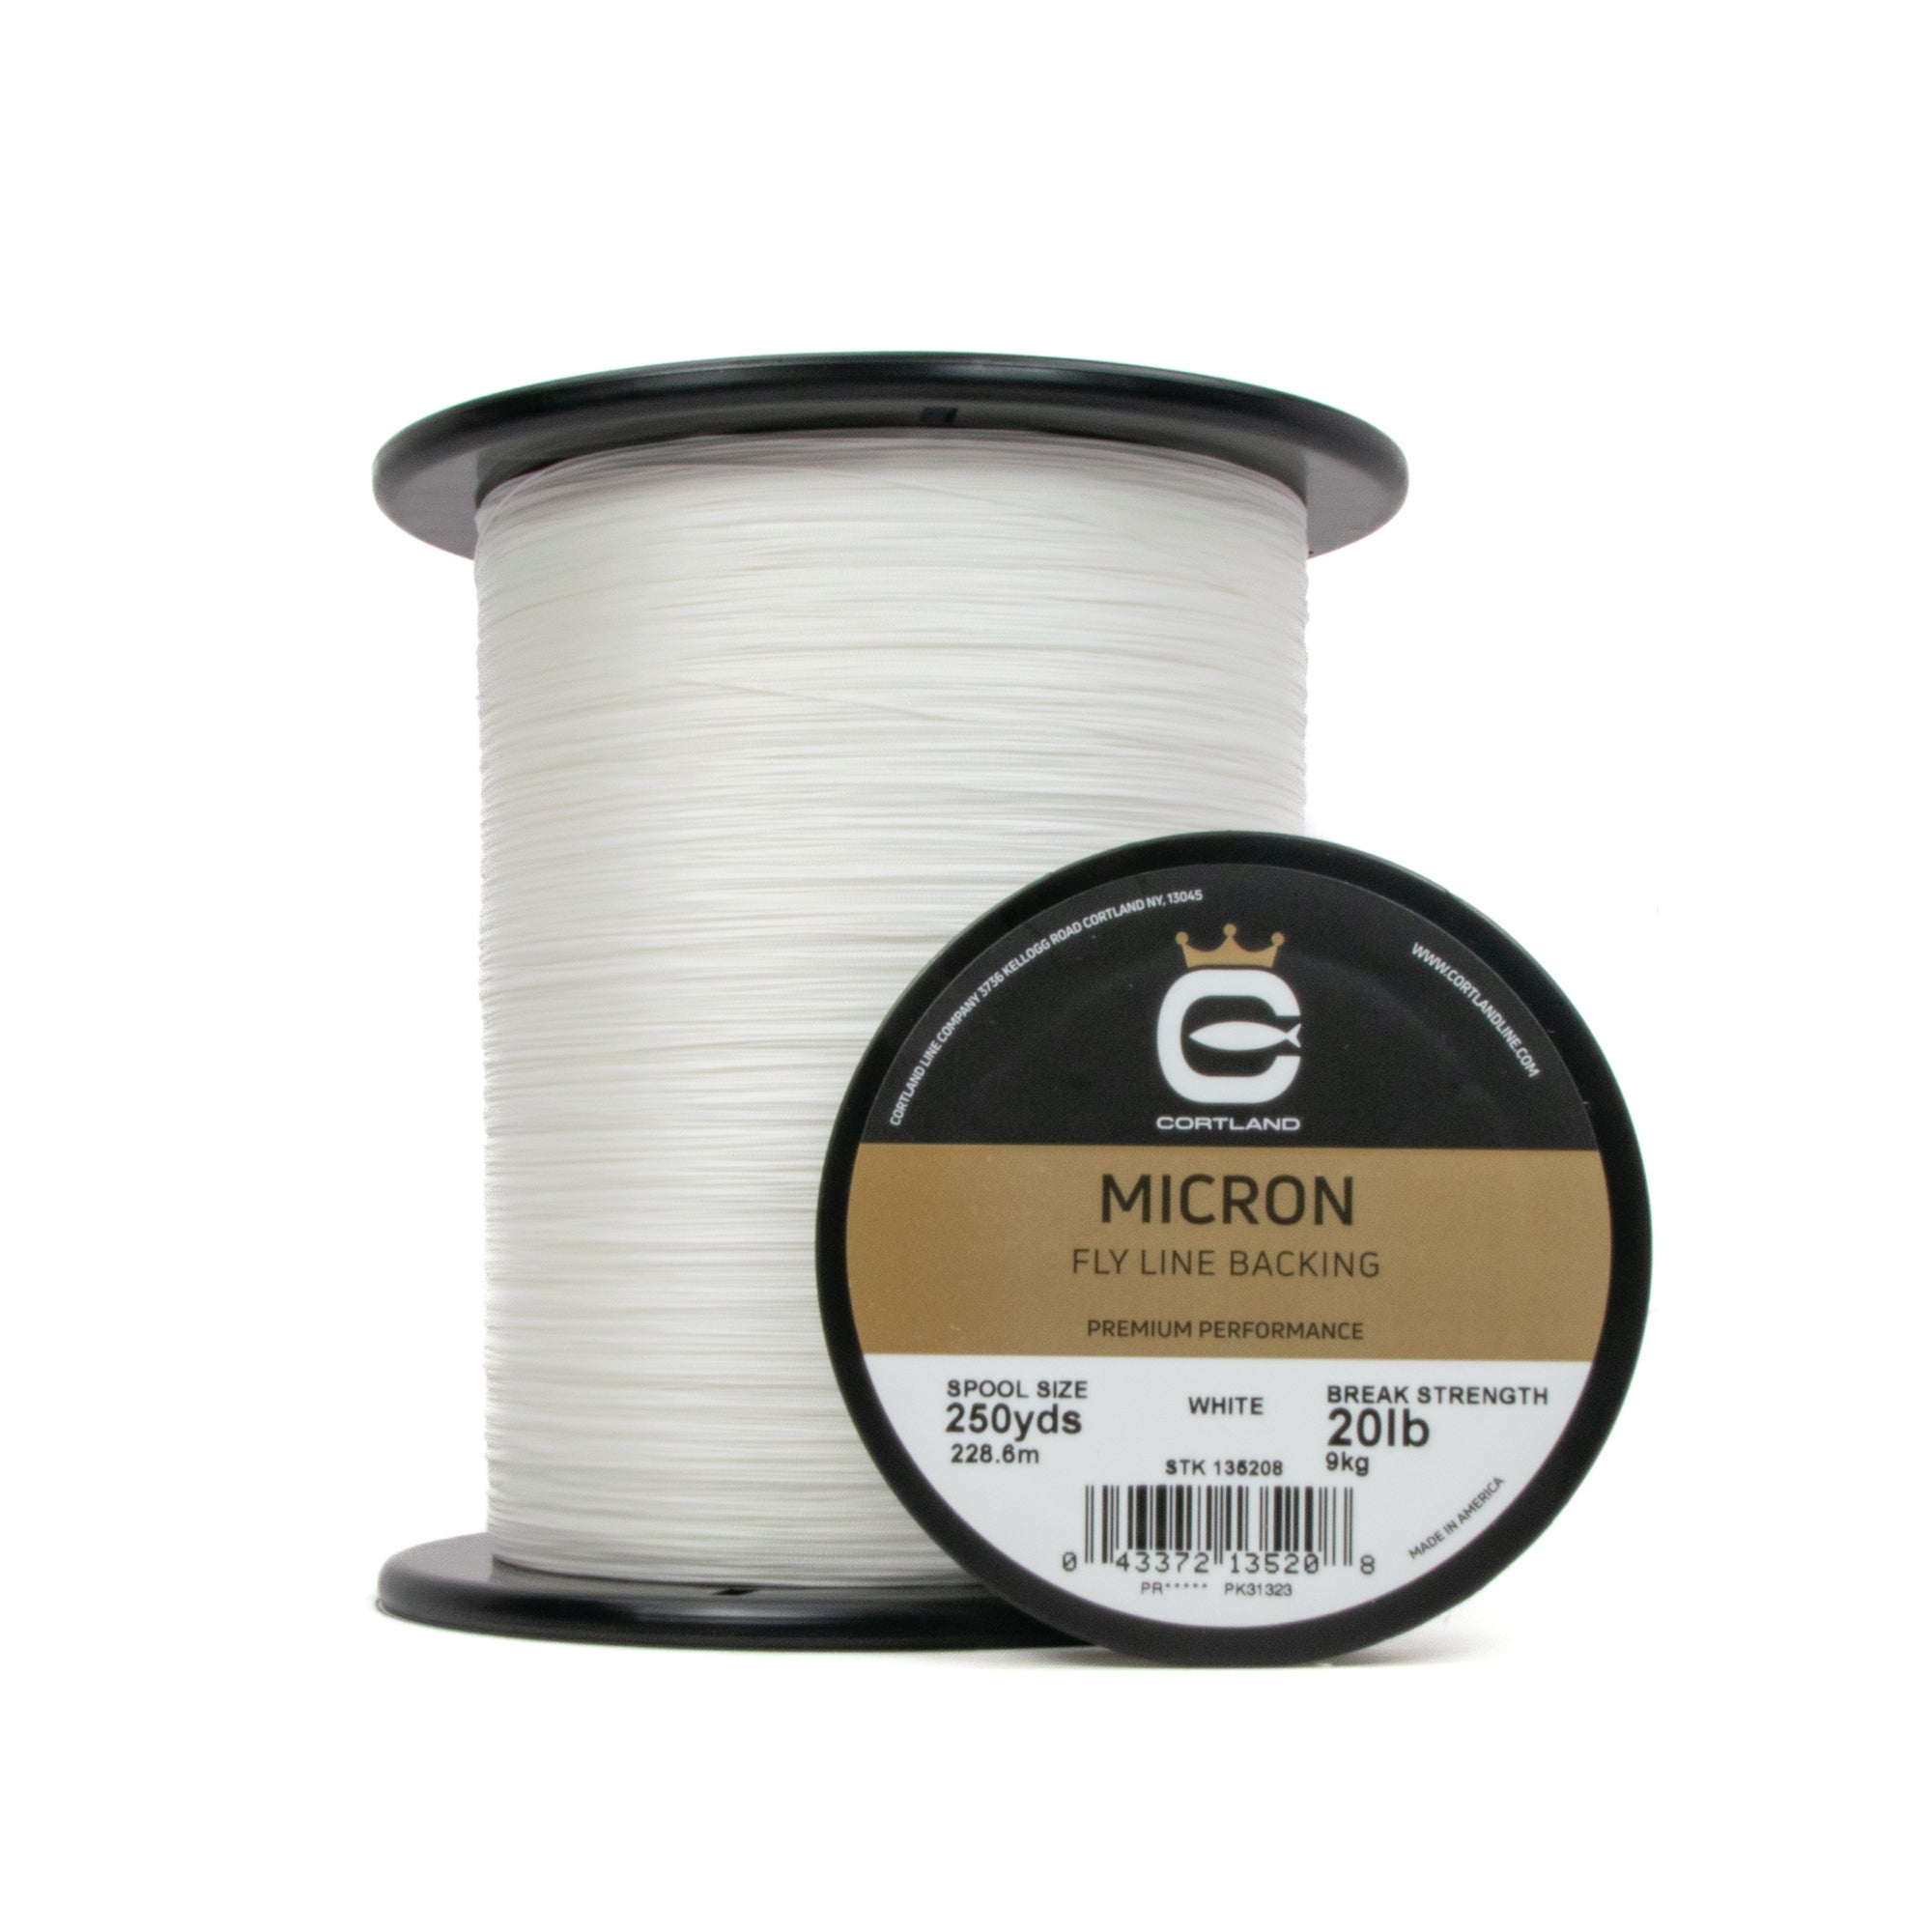 Micron Fly Line Backing - White